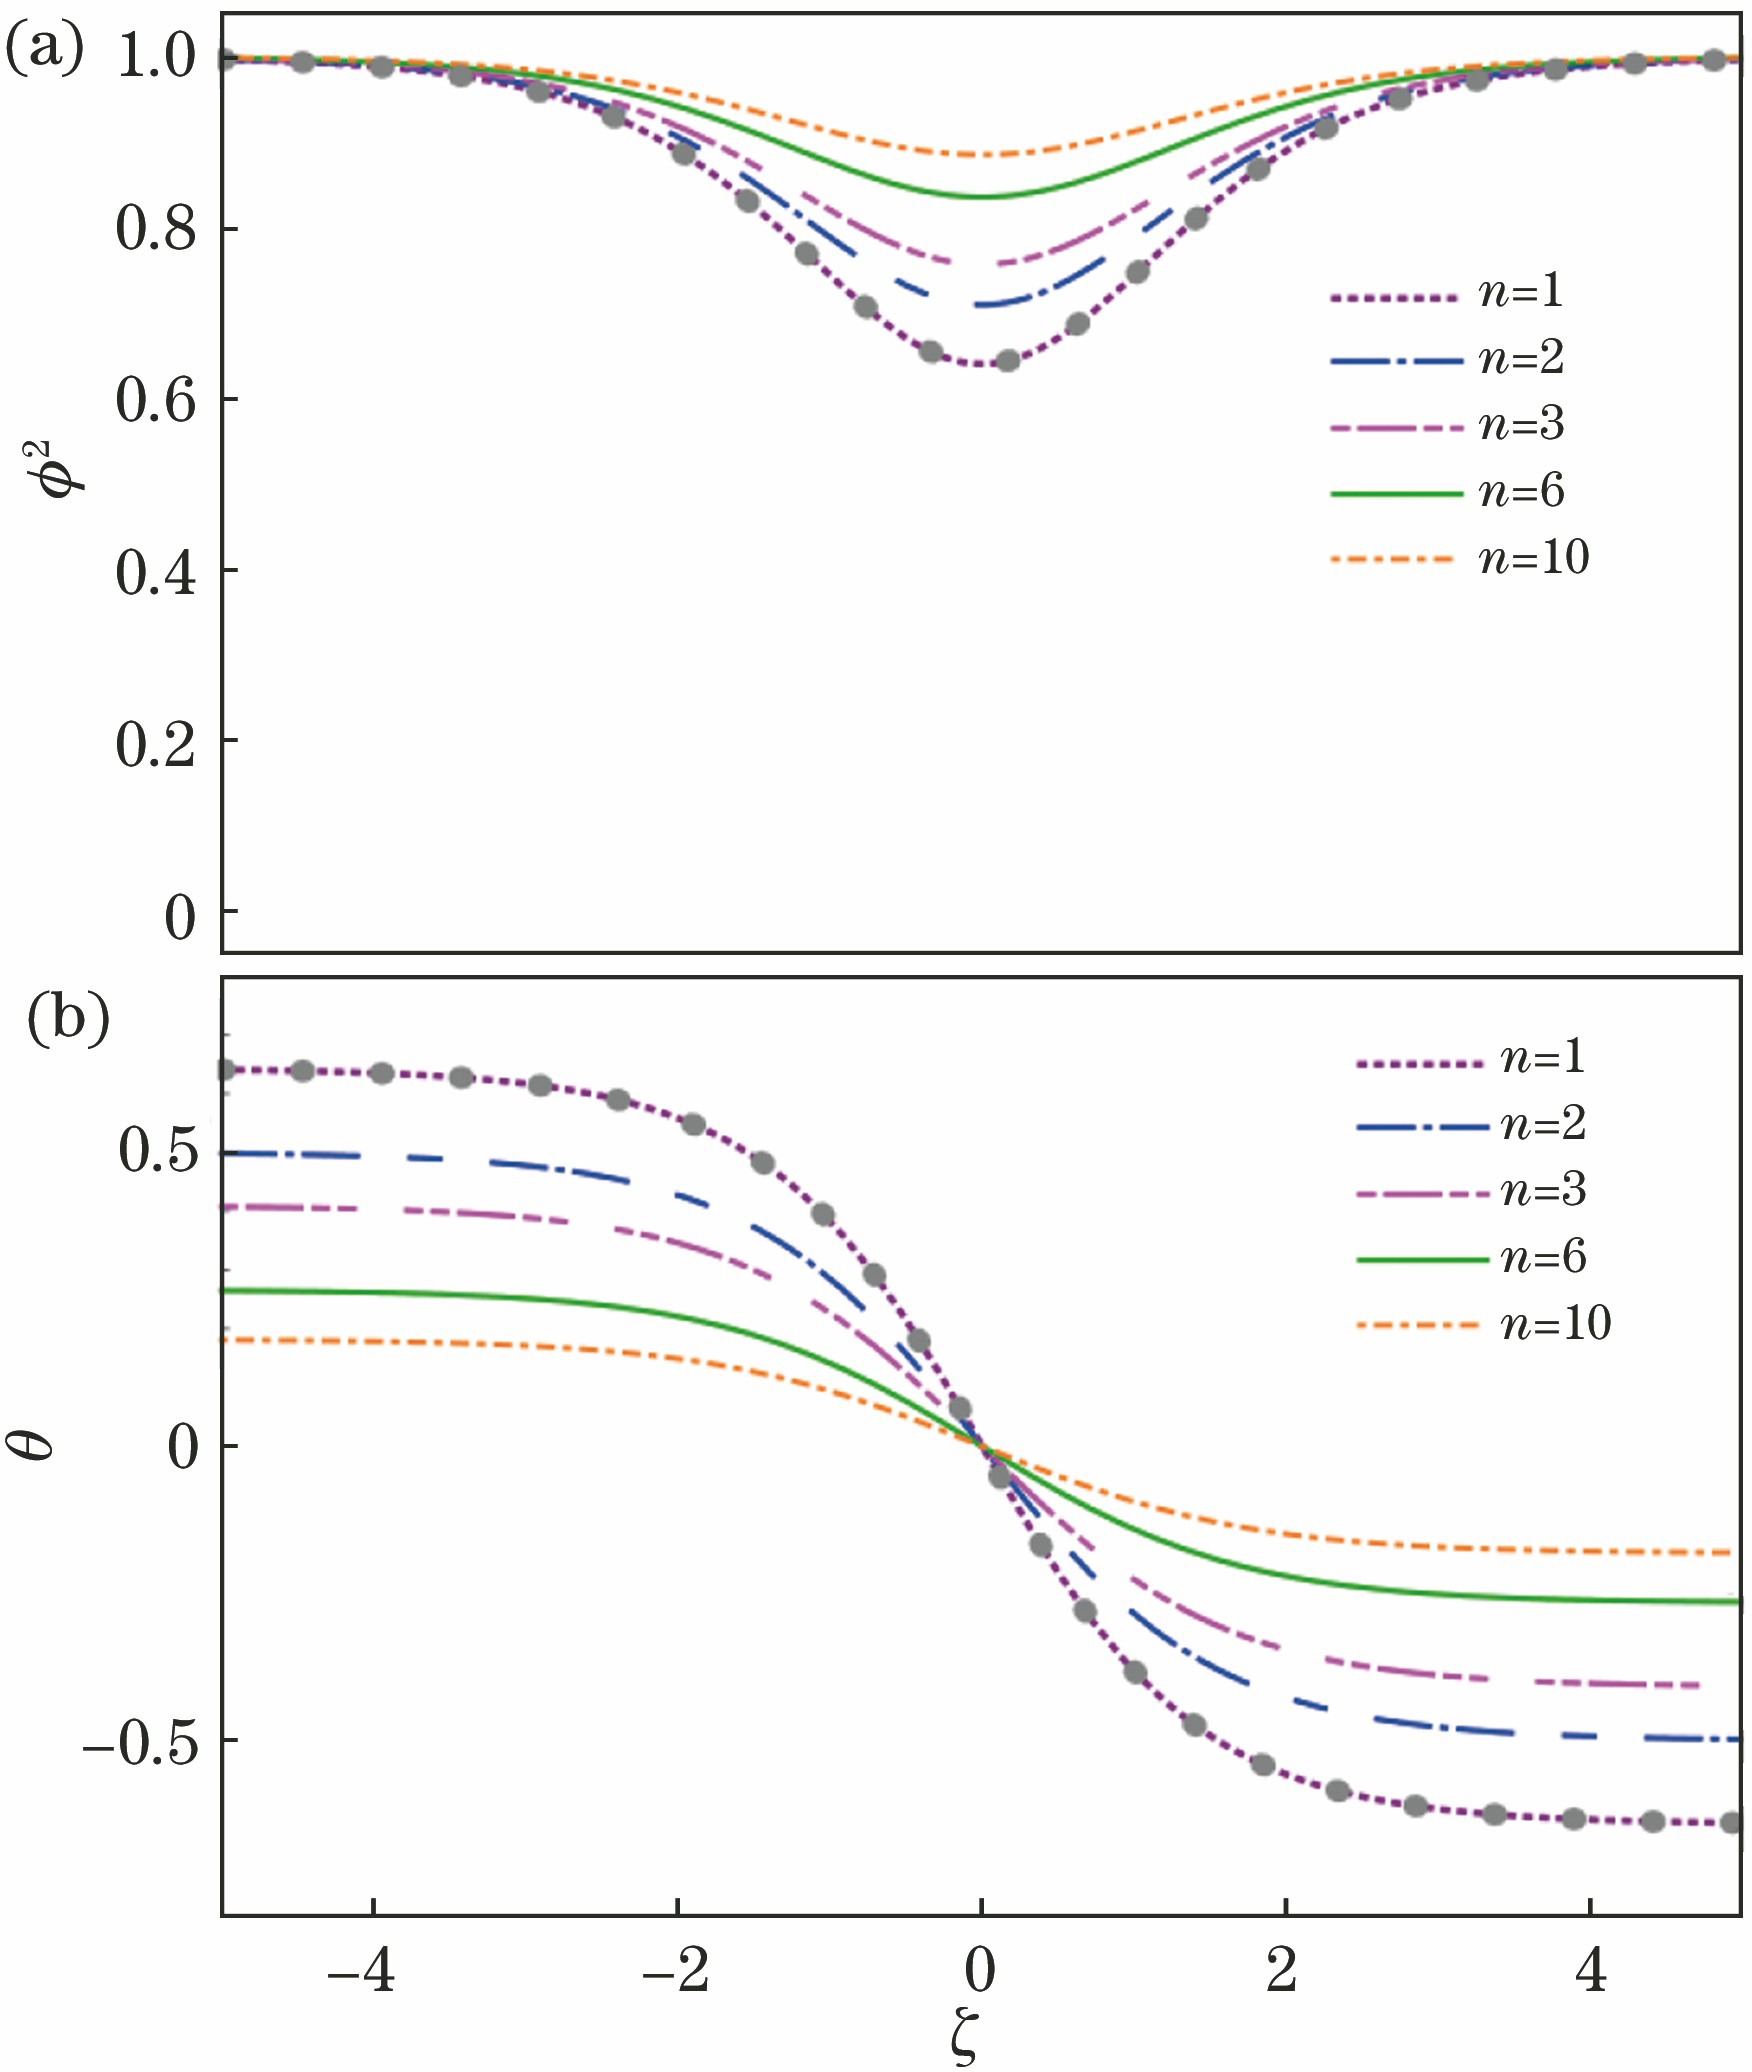 Variation of particle number density and phase of gray soliton with ζ for different n at v=0.8s. (a) Particle number density; (b) phase